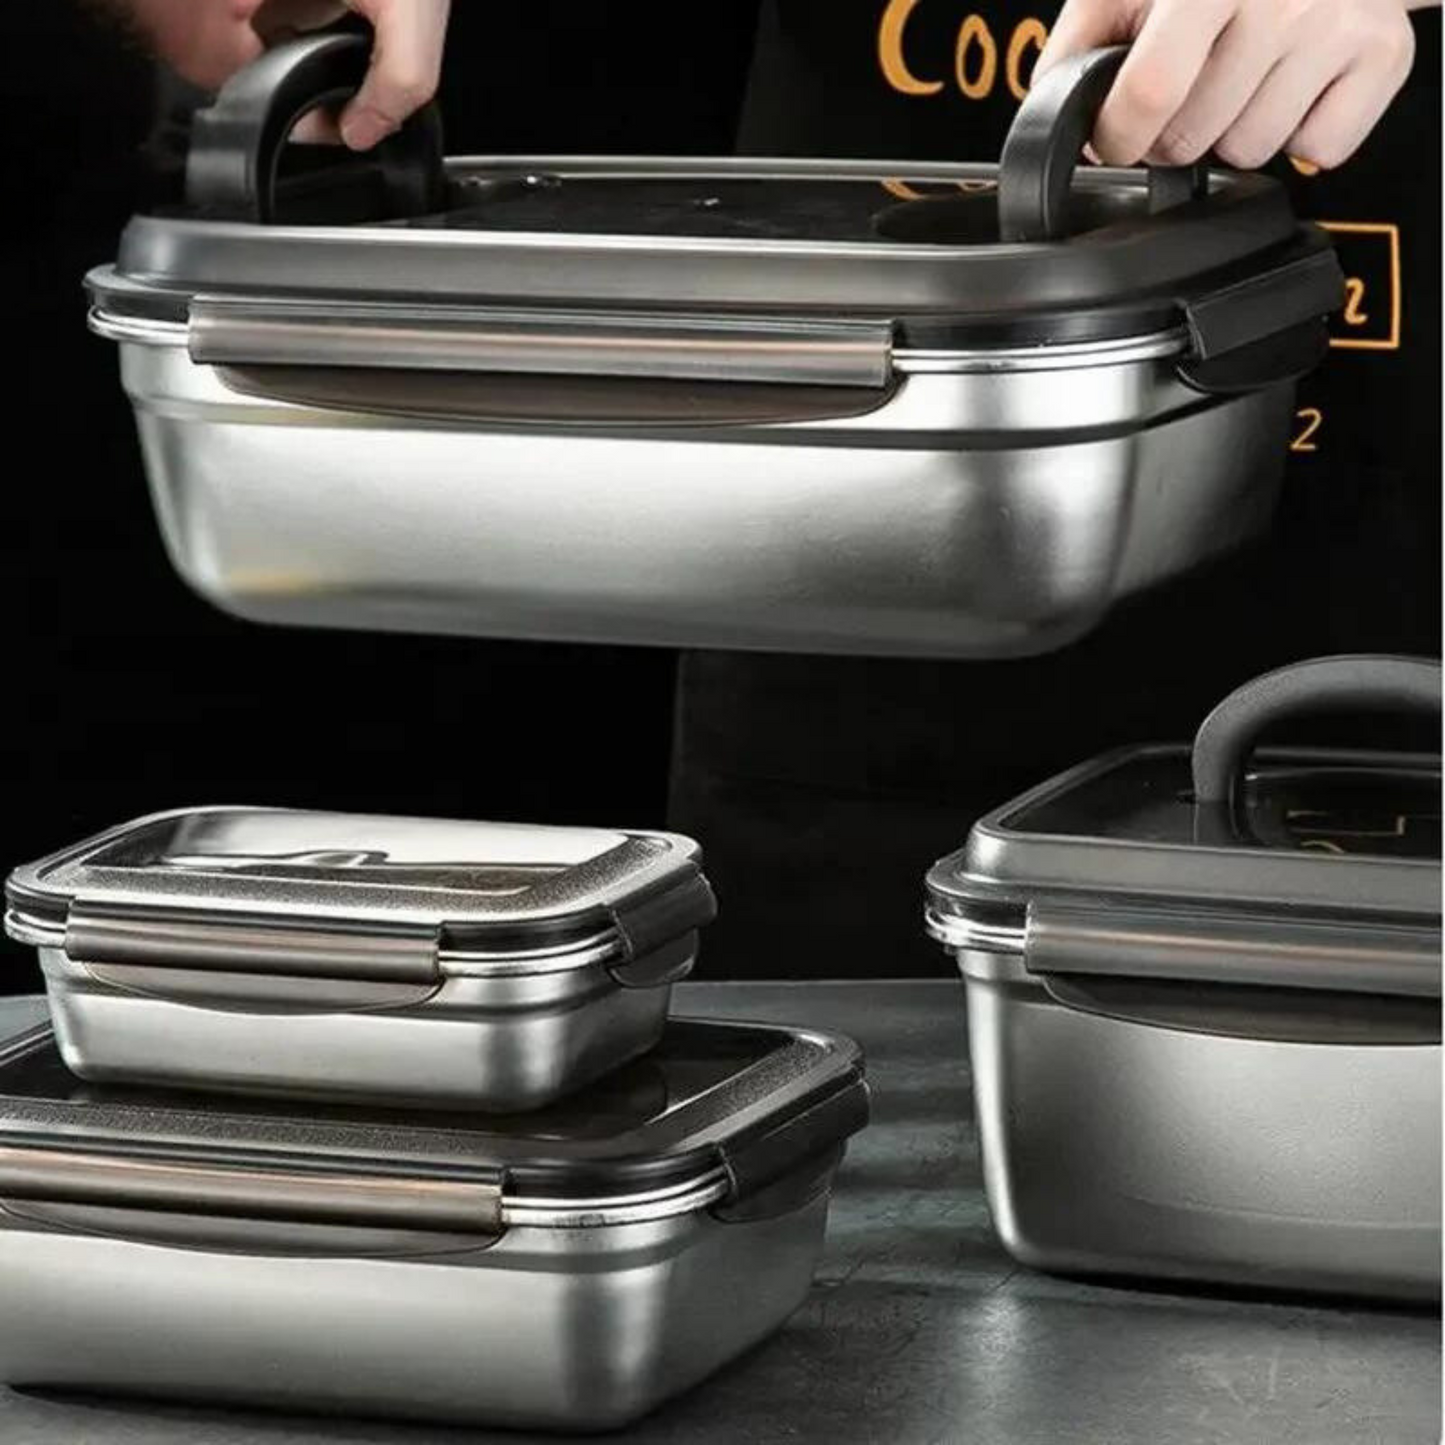 Large Capacity Stainless Steel Outdoor Portable Lunch Bento Box: A person holding a large stainless steel lunch bento box, displaying its sturdy and durable build. This image highlights the box's thermal insulation properties.